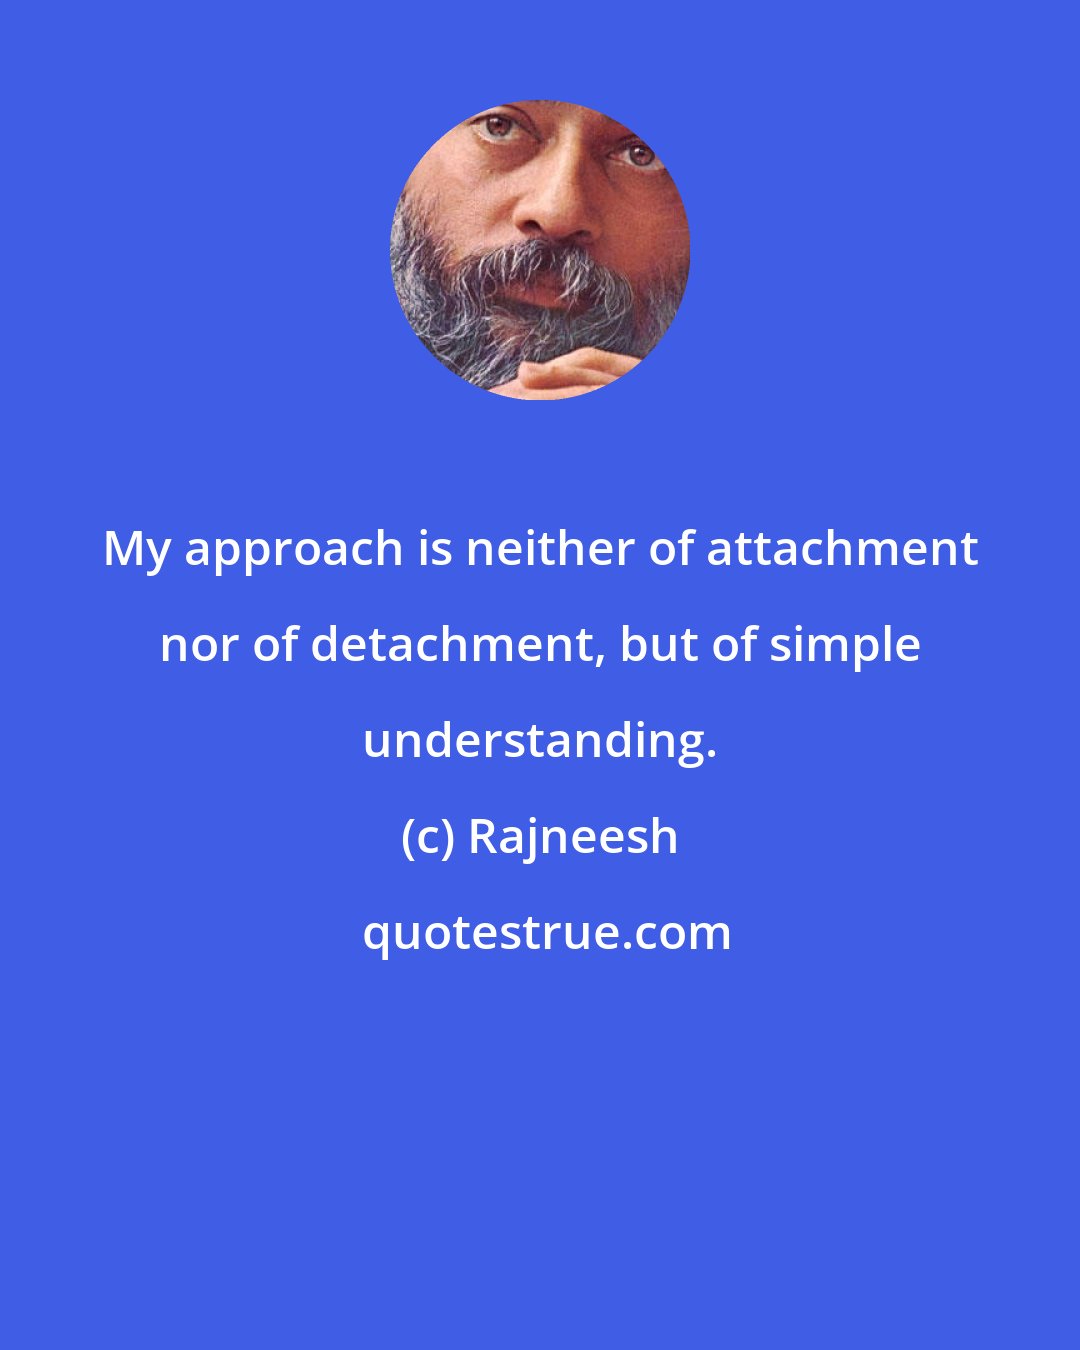 Rajneesh: My approach is neither of attachment nor of detachment, but of simple understanding.